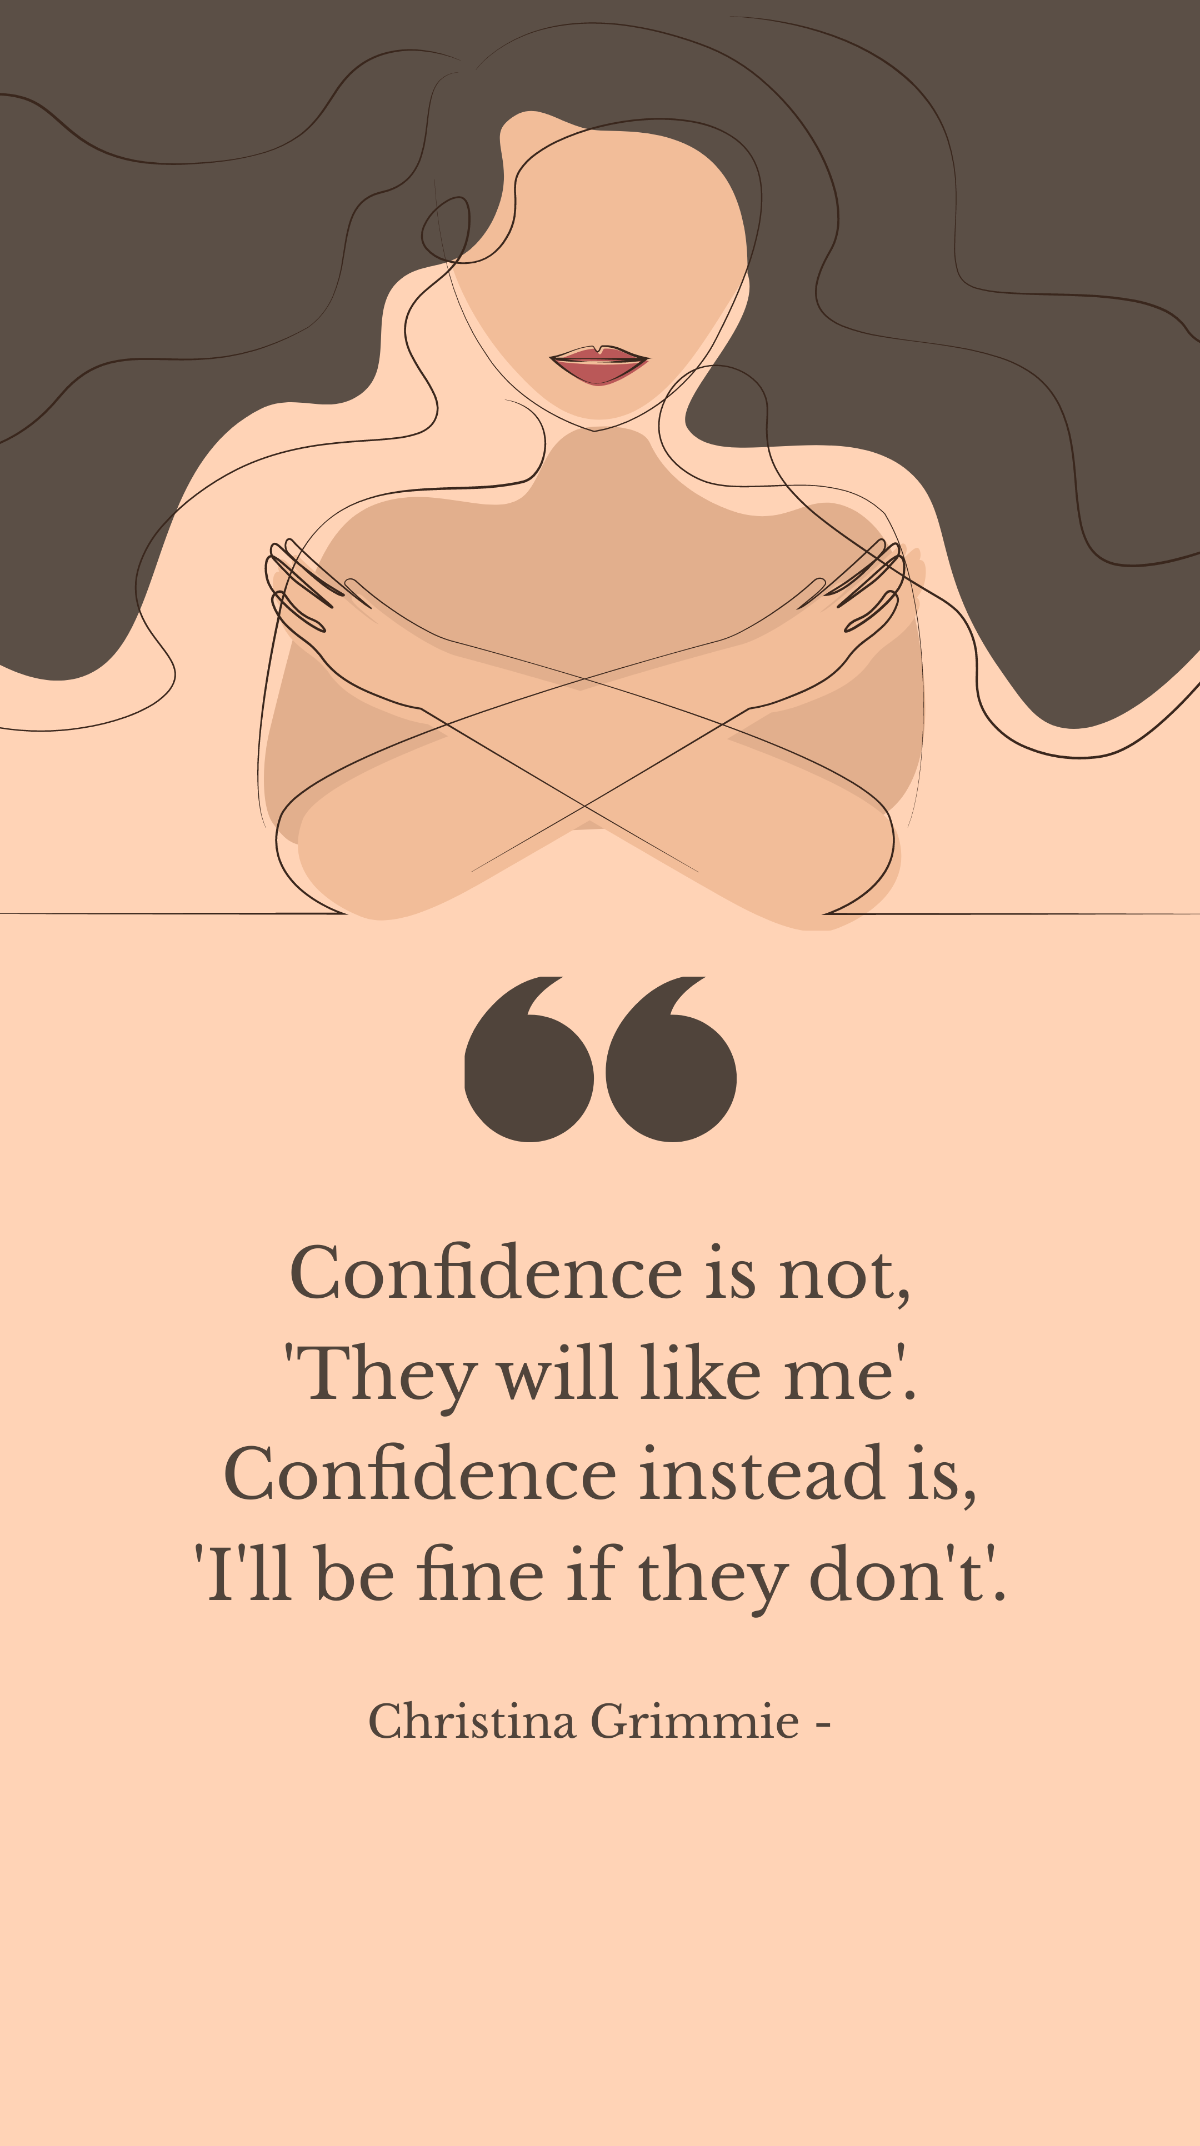 Christina Grimmie - Confidence is not, 'They will like me'. Confidence instead is, 'I'll be fine if they don't'. Template